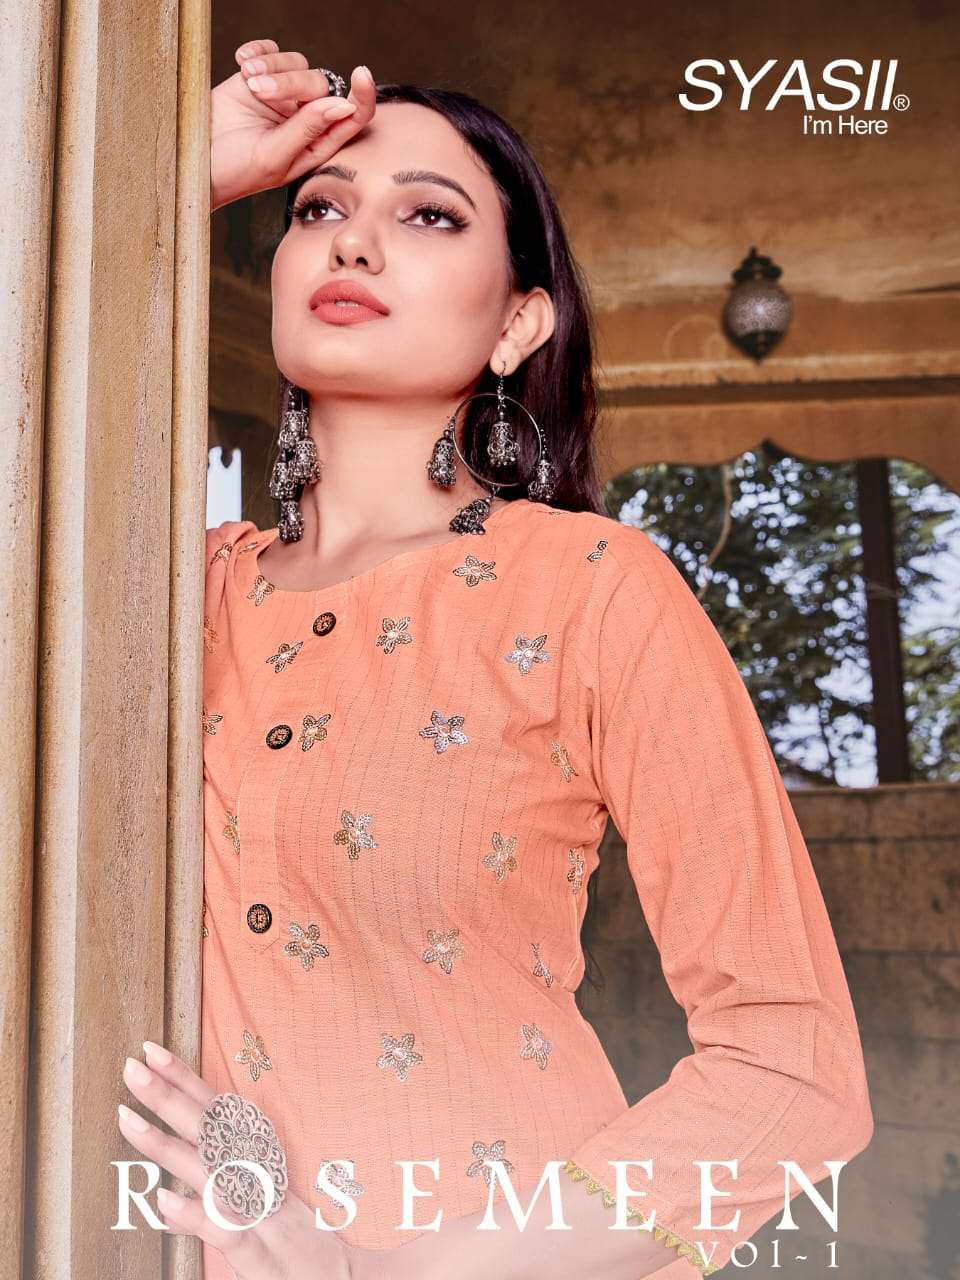 ROSEMEEN BY SYASII 1001 TO 1005 SERIES BEAUTIFUL STYLISH FANCY COLORFUL CASUAL WEAR & ETHNIC WEAR & READY TO WEAR VISCOSE WEAVING EMBROIDERED KURTIS WITH BOTTOM AT WHOLESALE PRICE